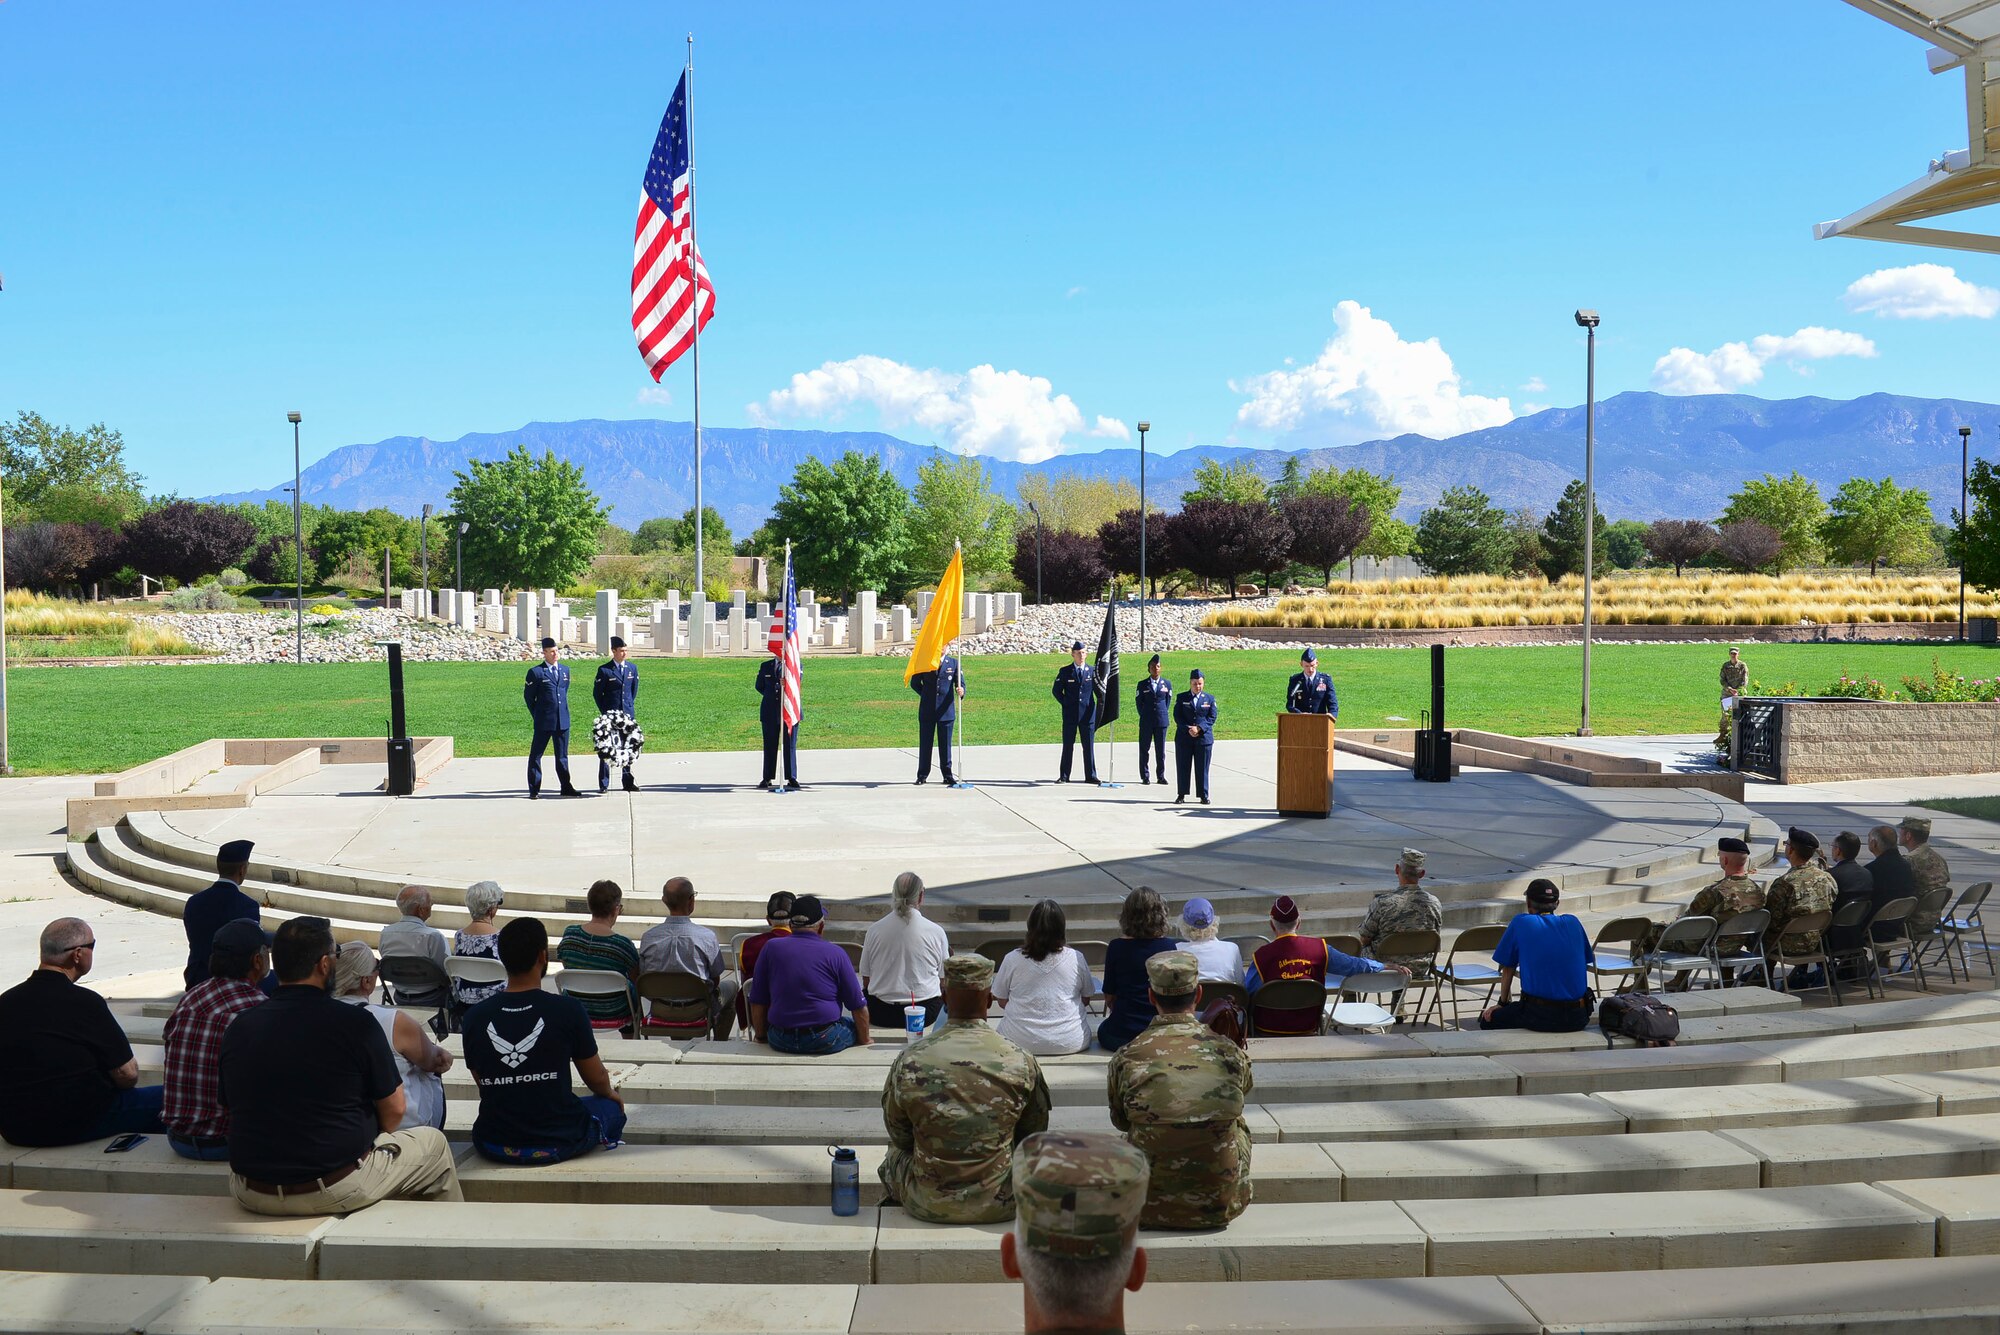 Members of the crowd listen to Maj. Gen. (Ret.) Melvyn Montano the POW/MIA ceremony distinguished guest speaker in Albuquerque, N.M., Sept. 20, 2019. Montano spoke about memory he recalled during his time serving. (U.S. Air Force photo by Senior Airman Enrique Barceló)